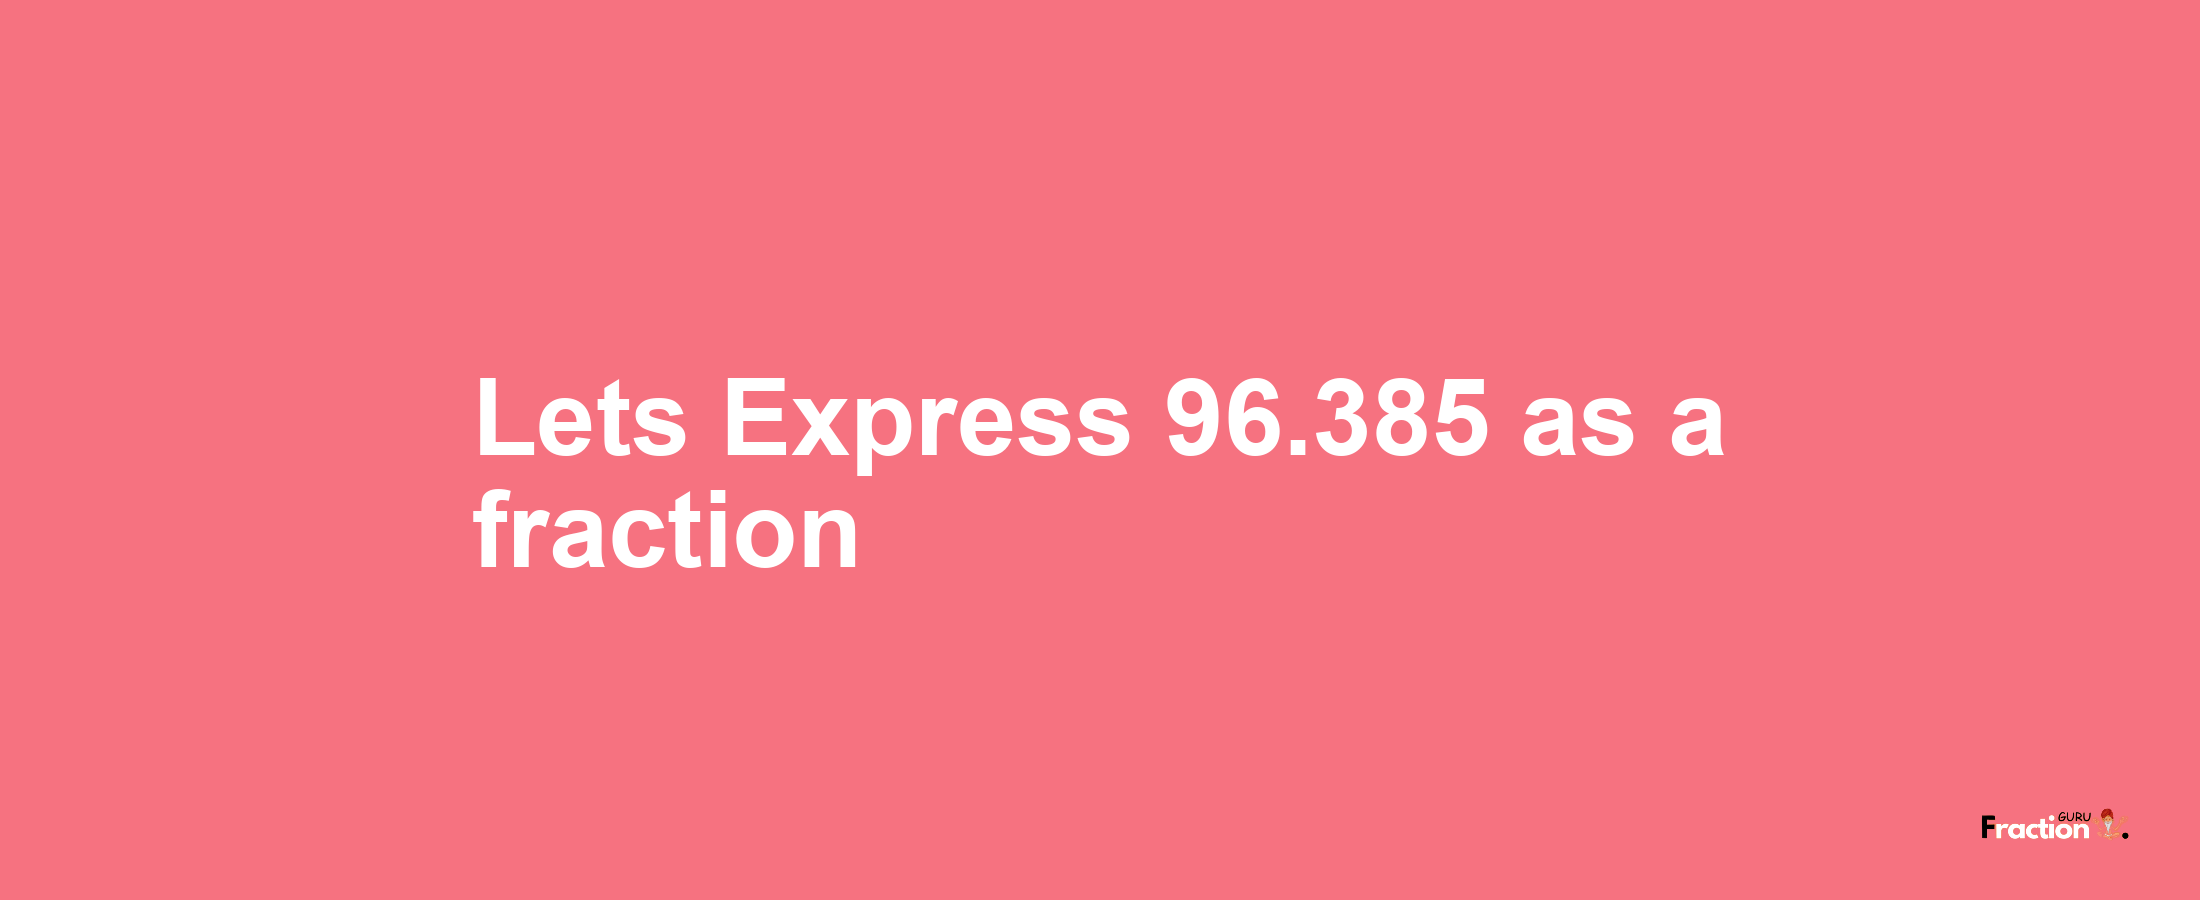 Lets Express 96.385 as afraction